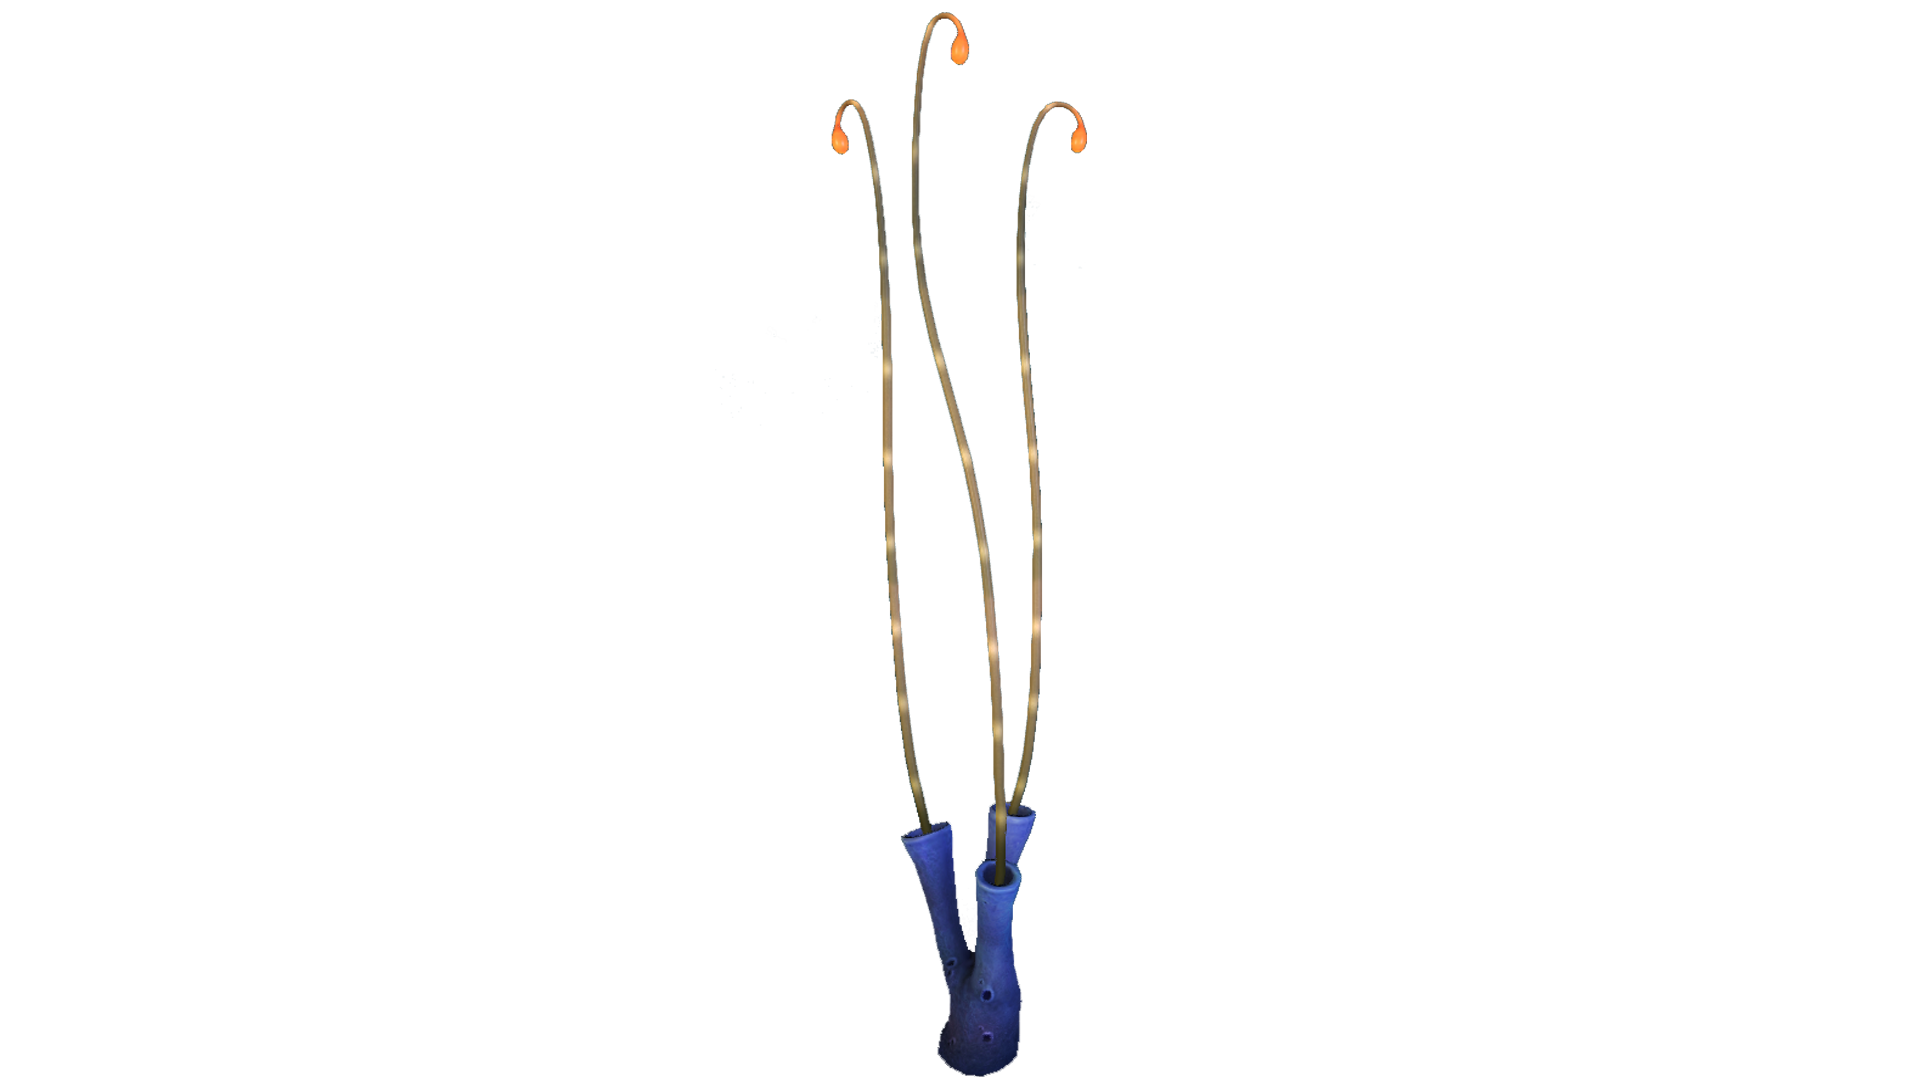 Blue Coral Tubes Fauna.png